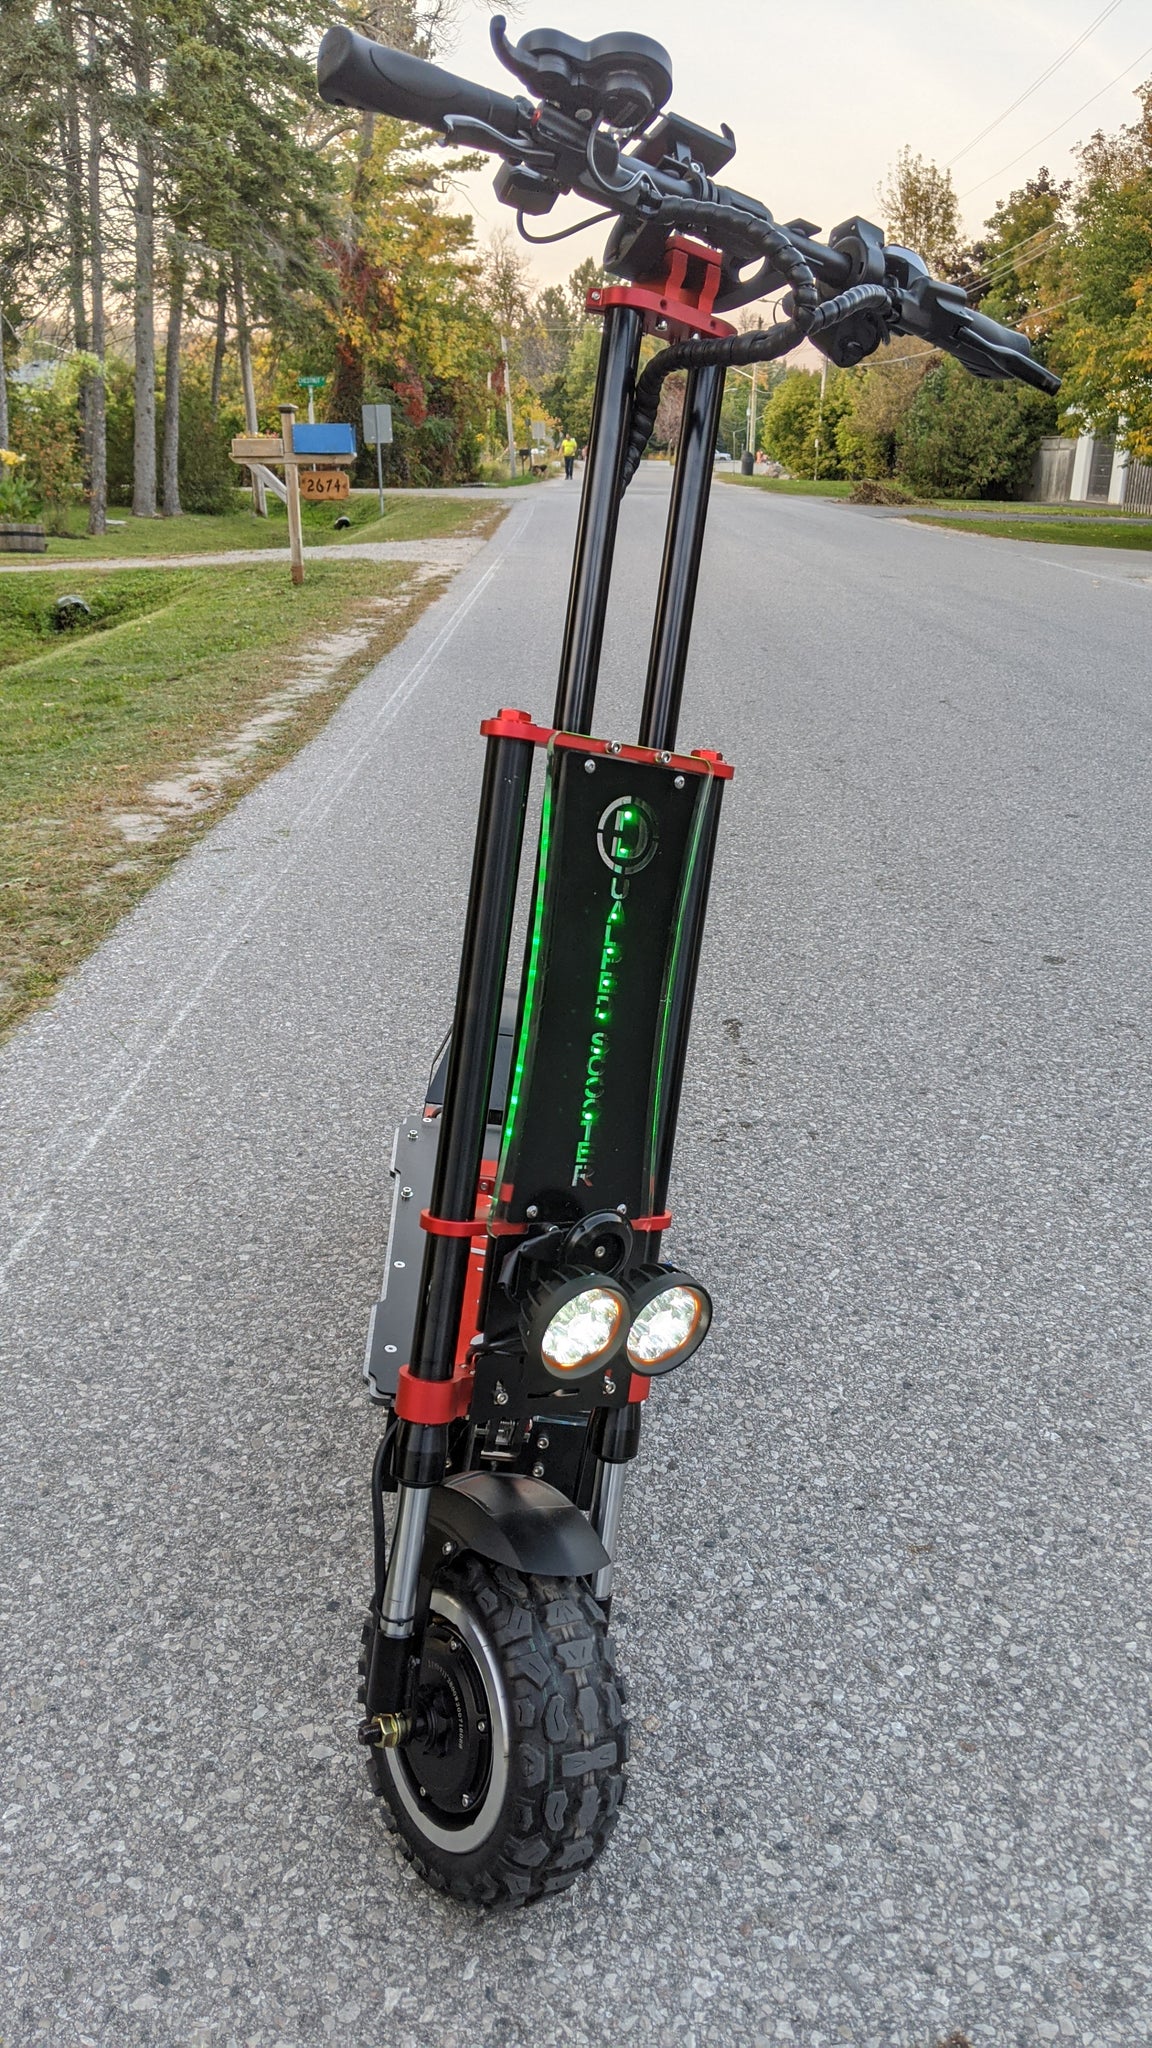 Dualped Ultra The World's Fastest 60V Electric Scooter..ONLY $1999 USD